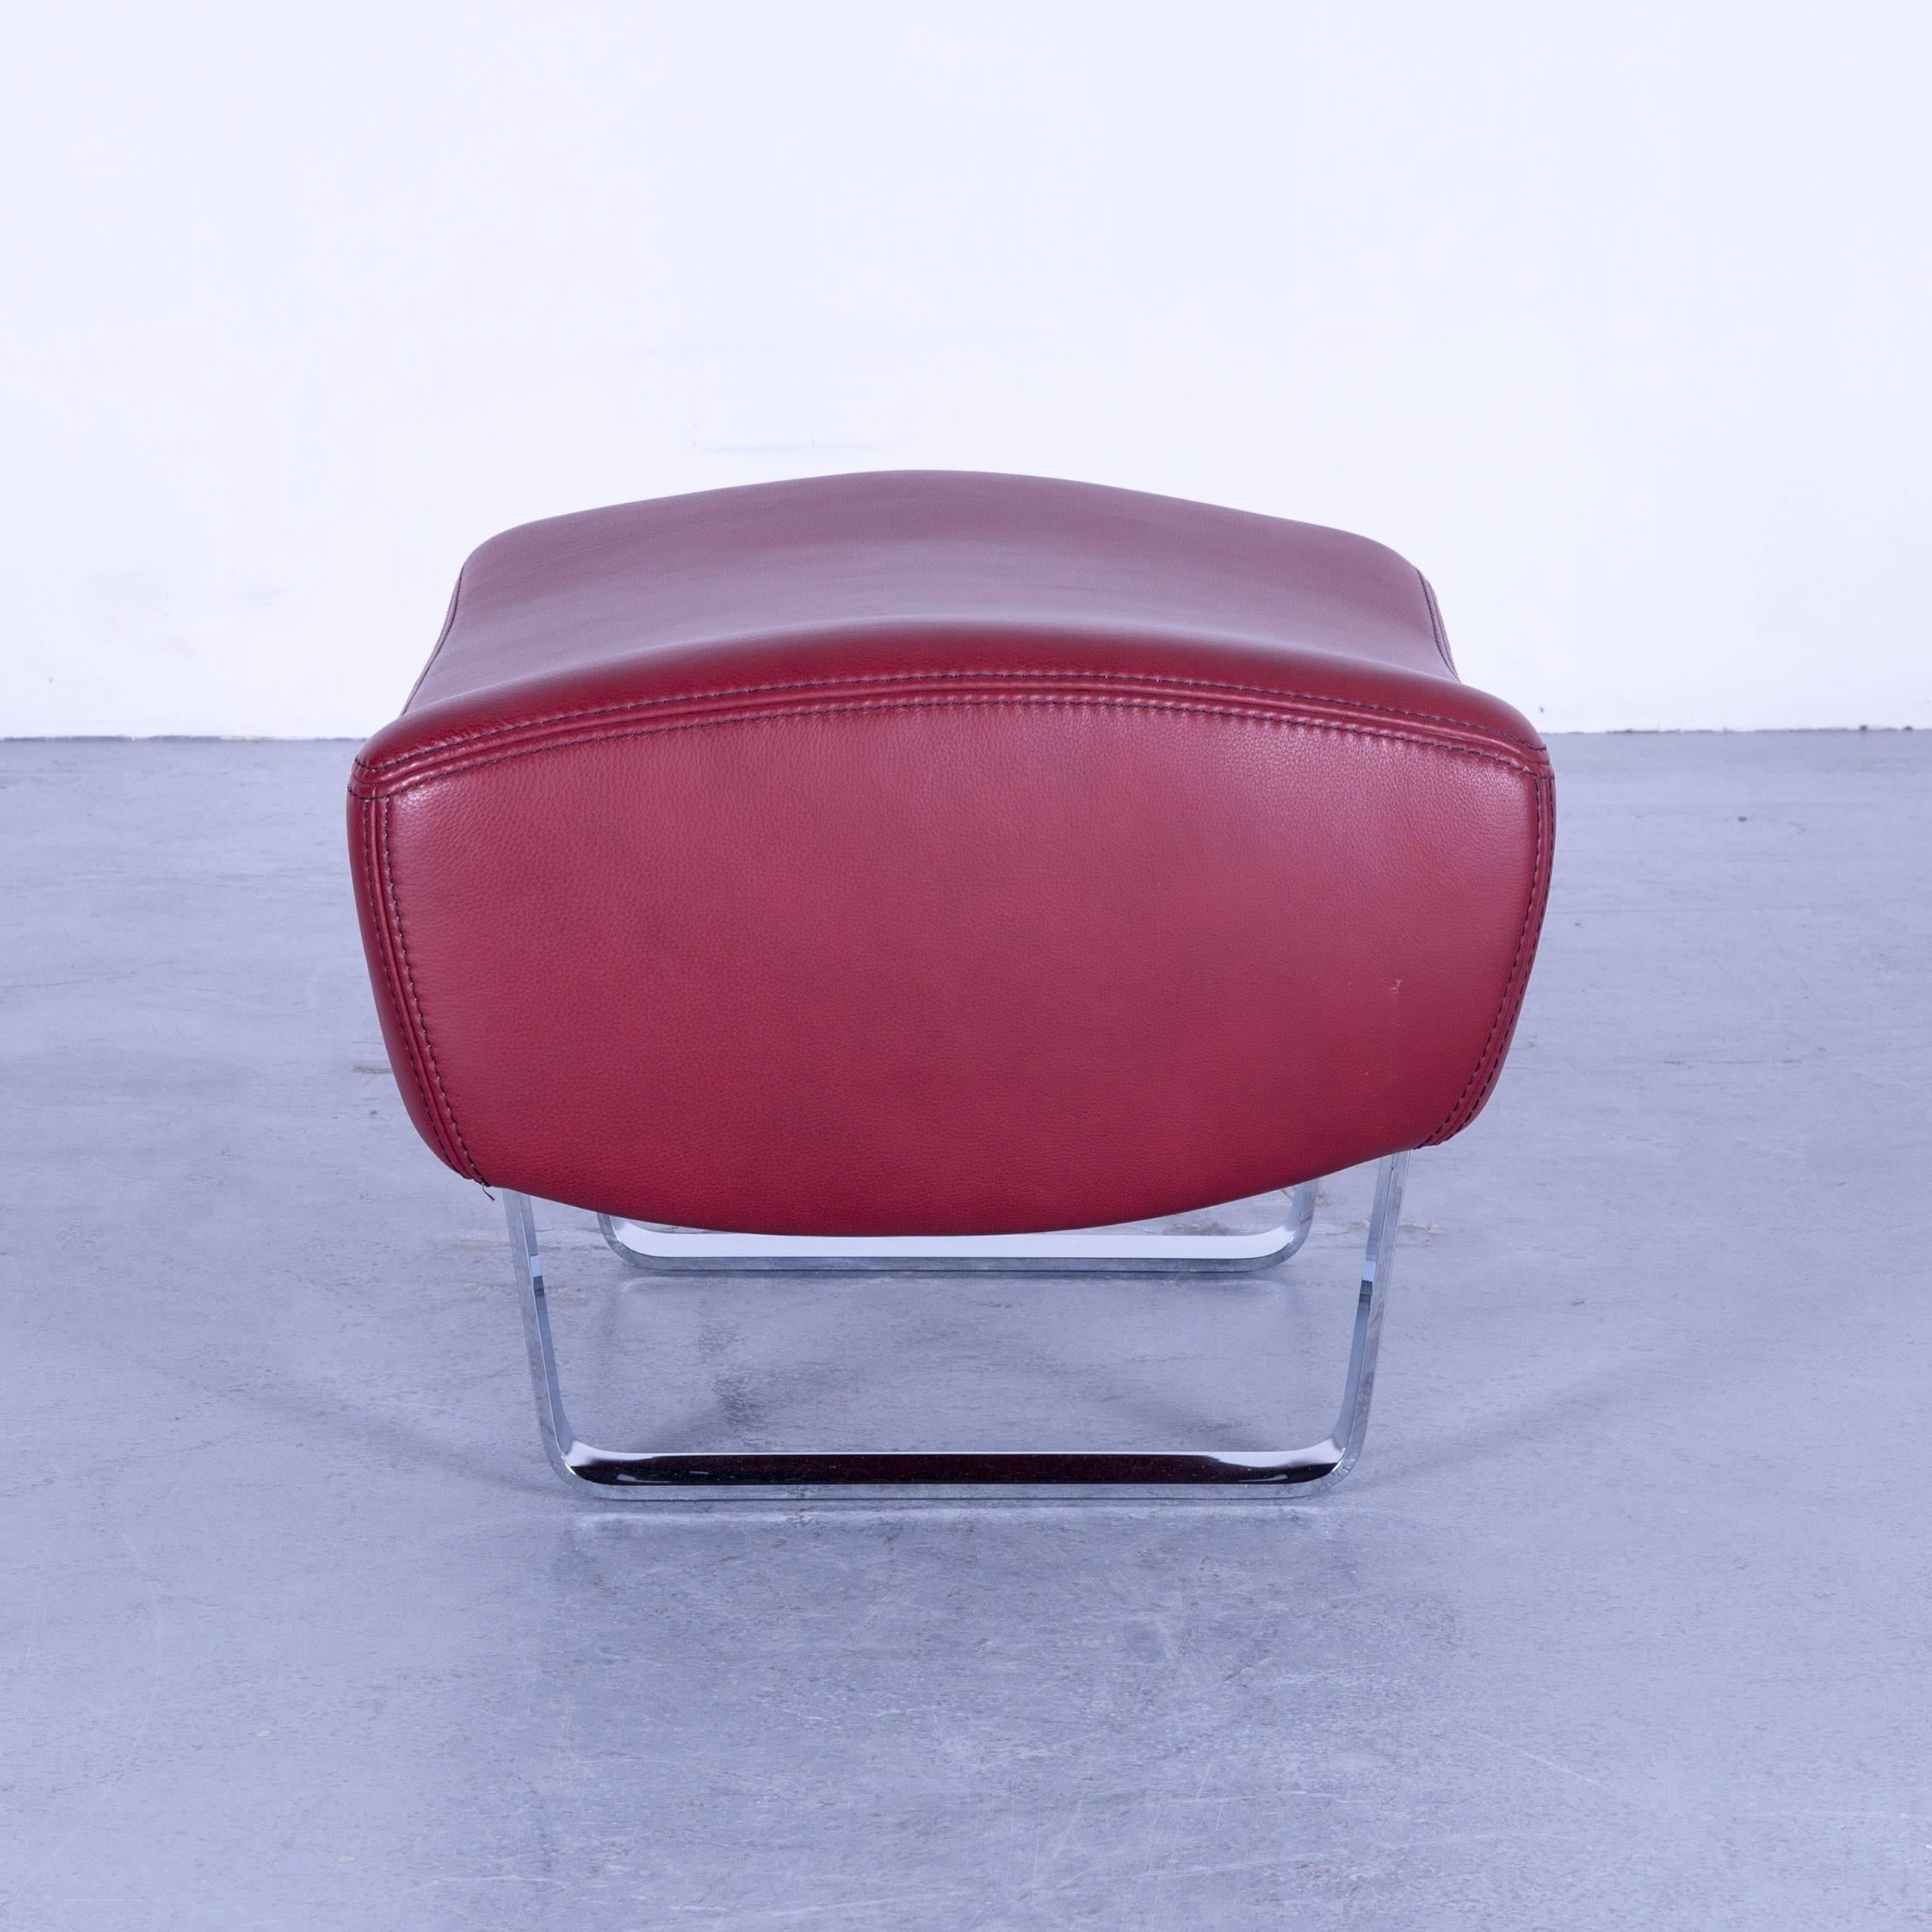 Koinor designer footstool Bordeaux wine red colored leather footrest pouf, made for pure comfort and flexibility.